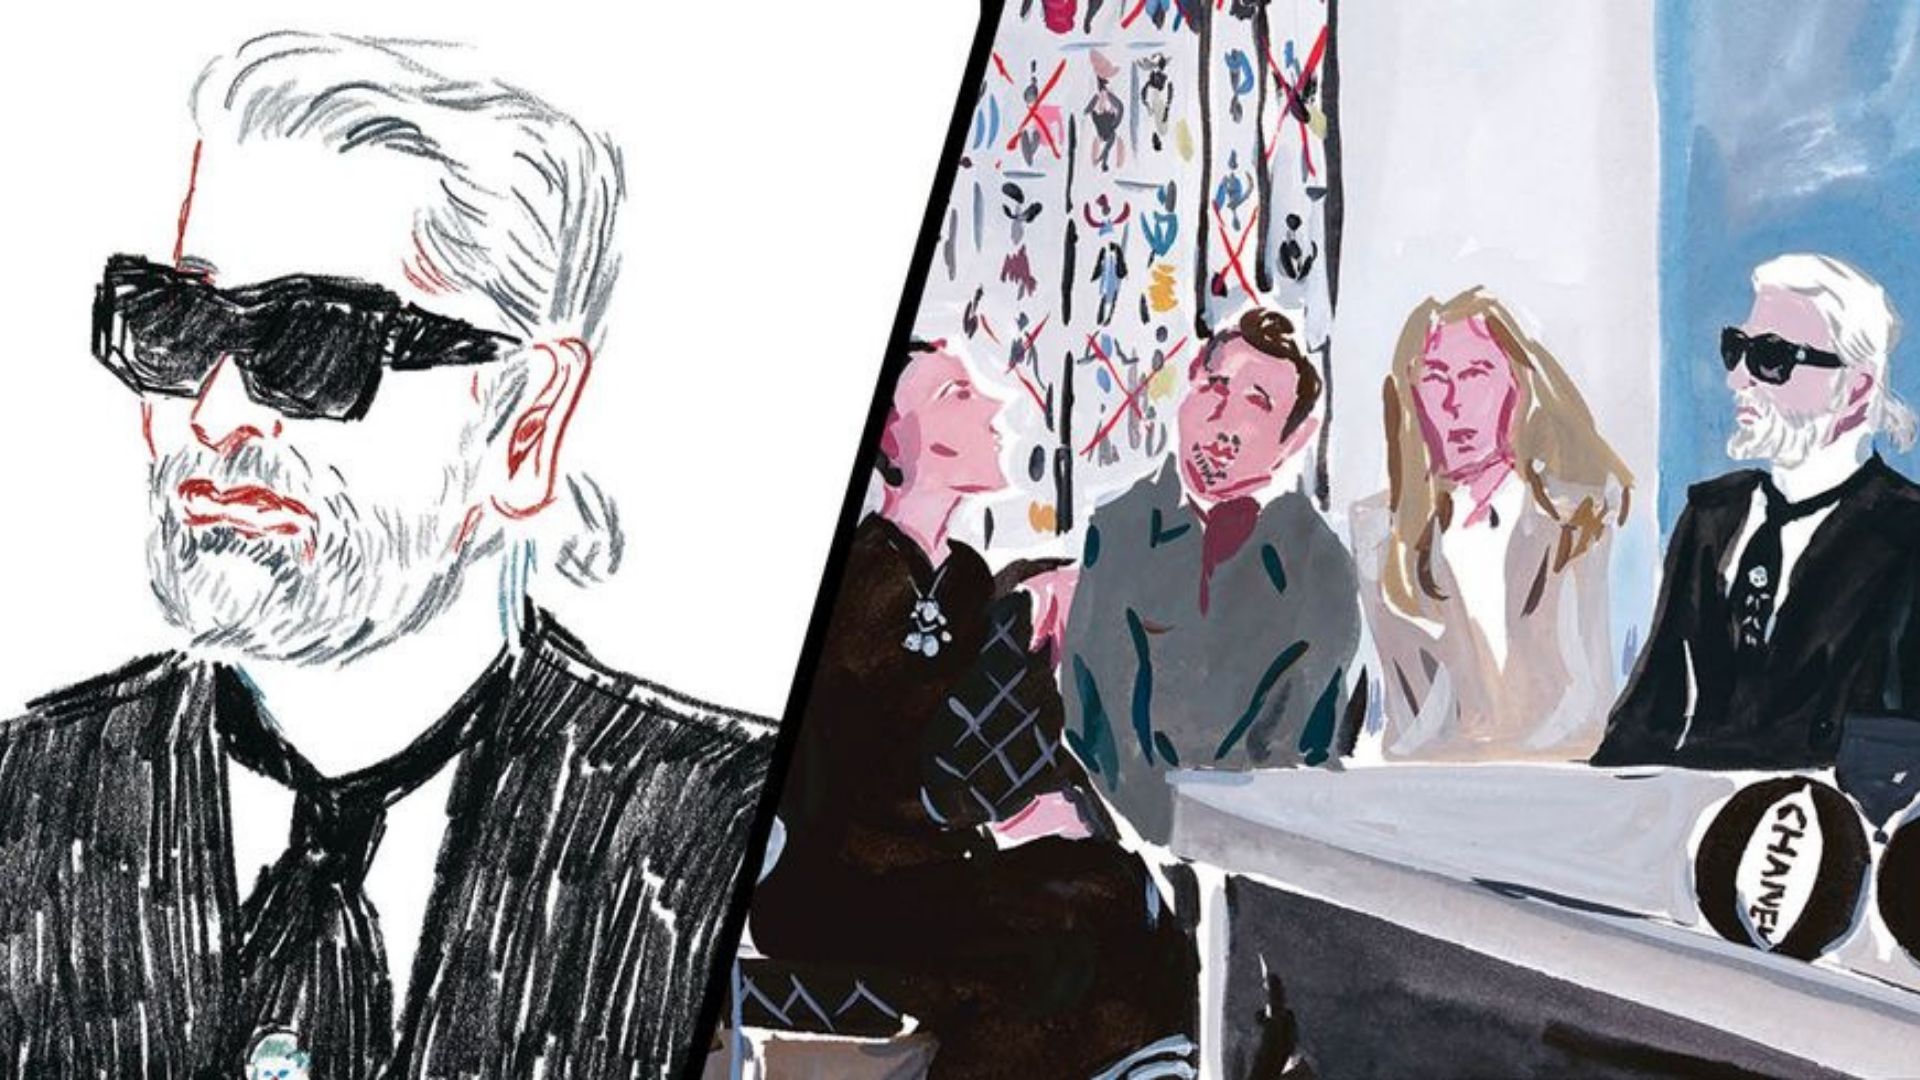 A New Illustrated Chanel Book Pays Homage To The Late Karl Lagerfeld